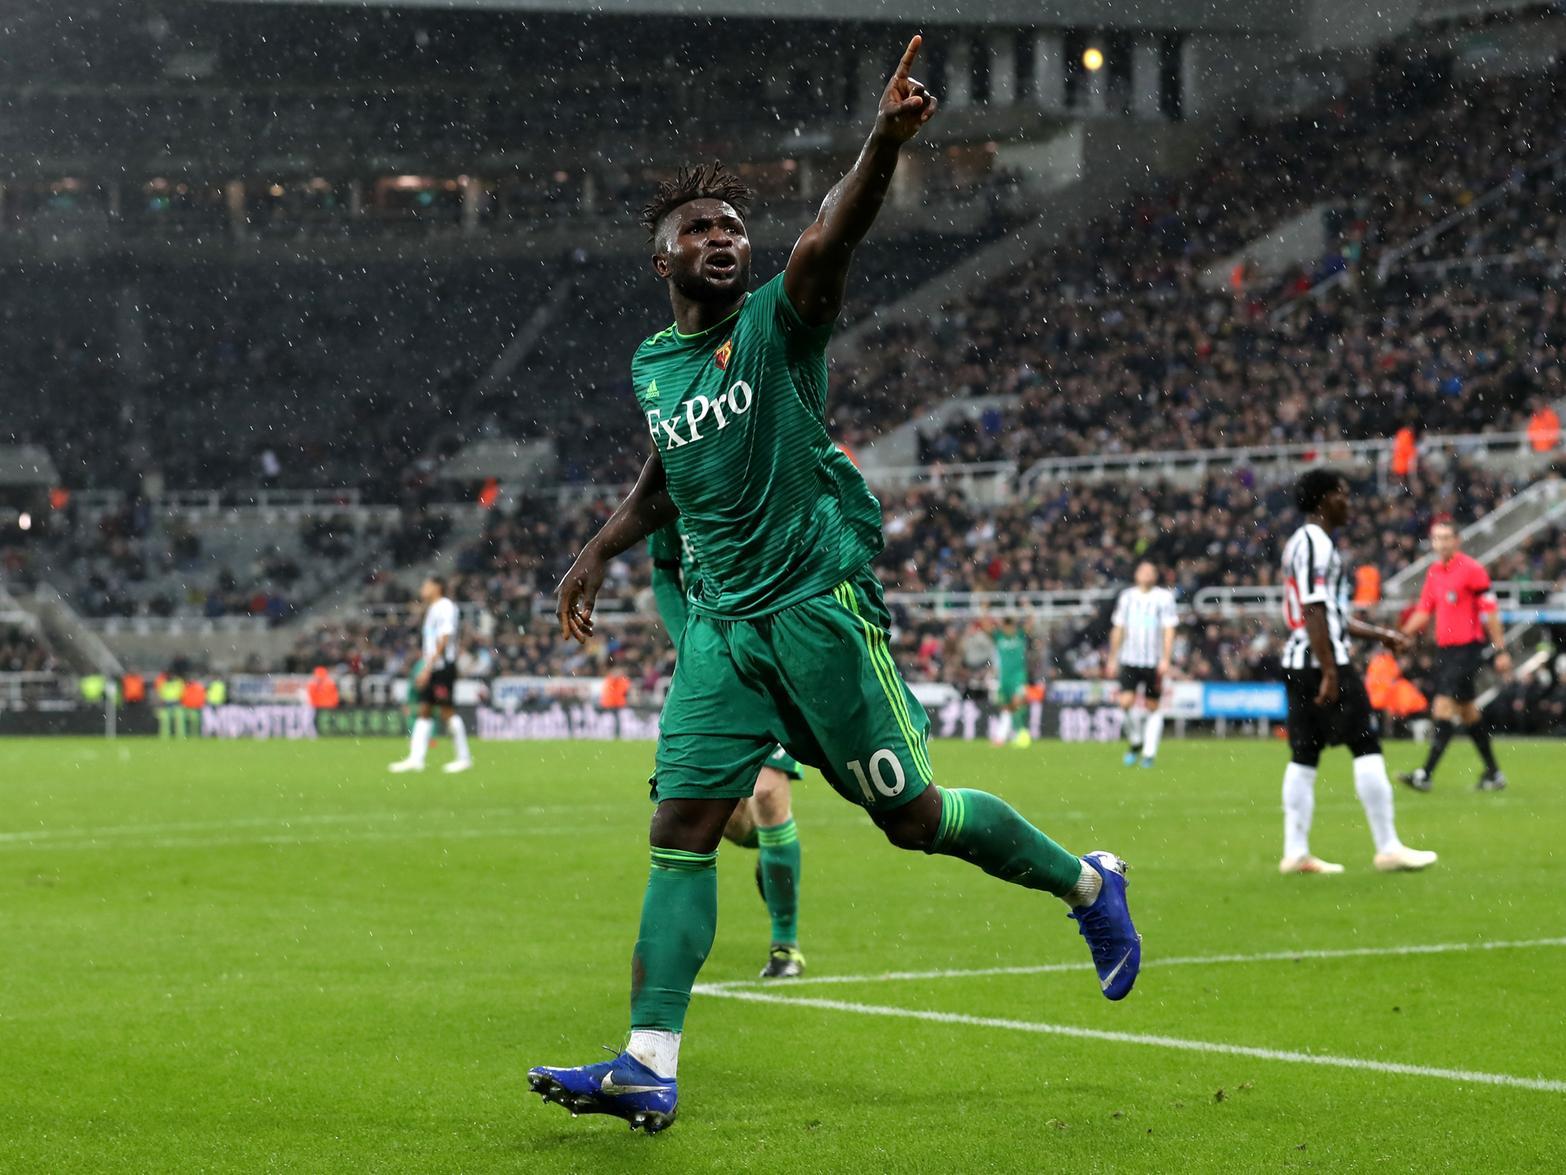 Cardiff City and Anderlecht are set to go toe-to-toe in the race to land Watford forward Isaac Success, who is likely to be let out on loan to get some invaluable first team experience. (Wales Online)